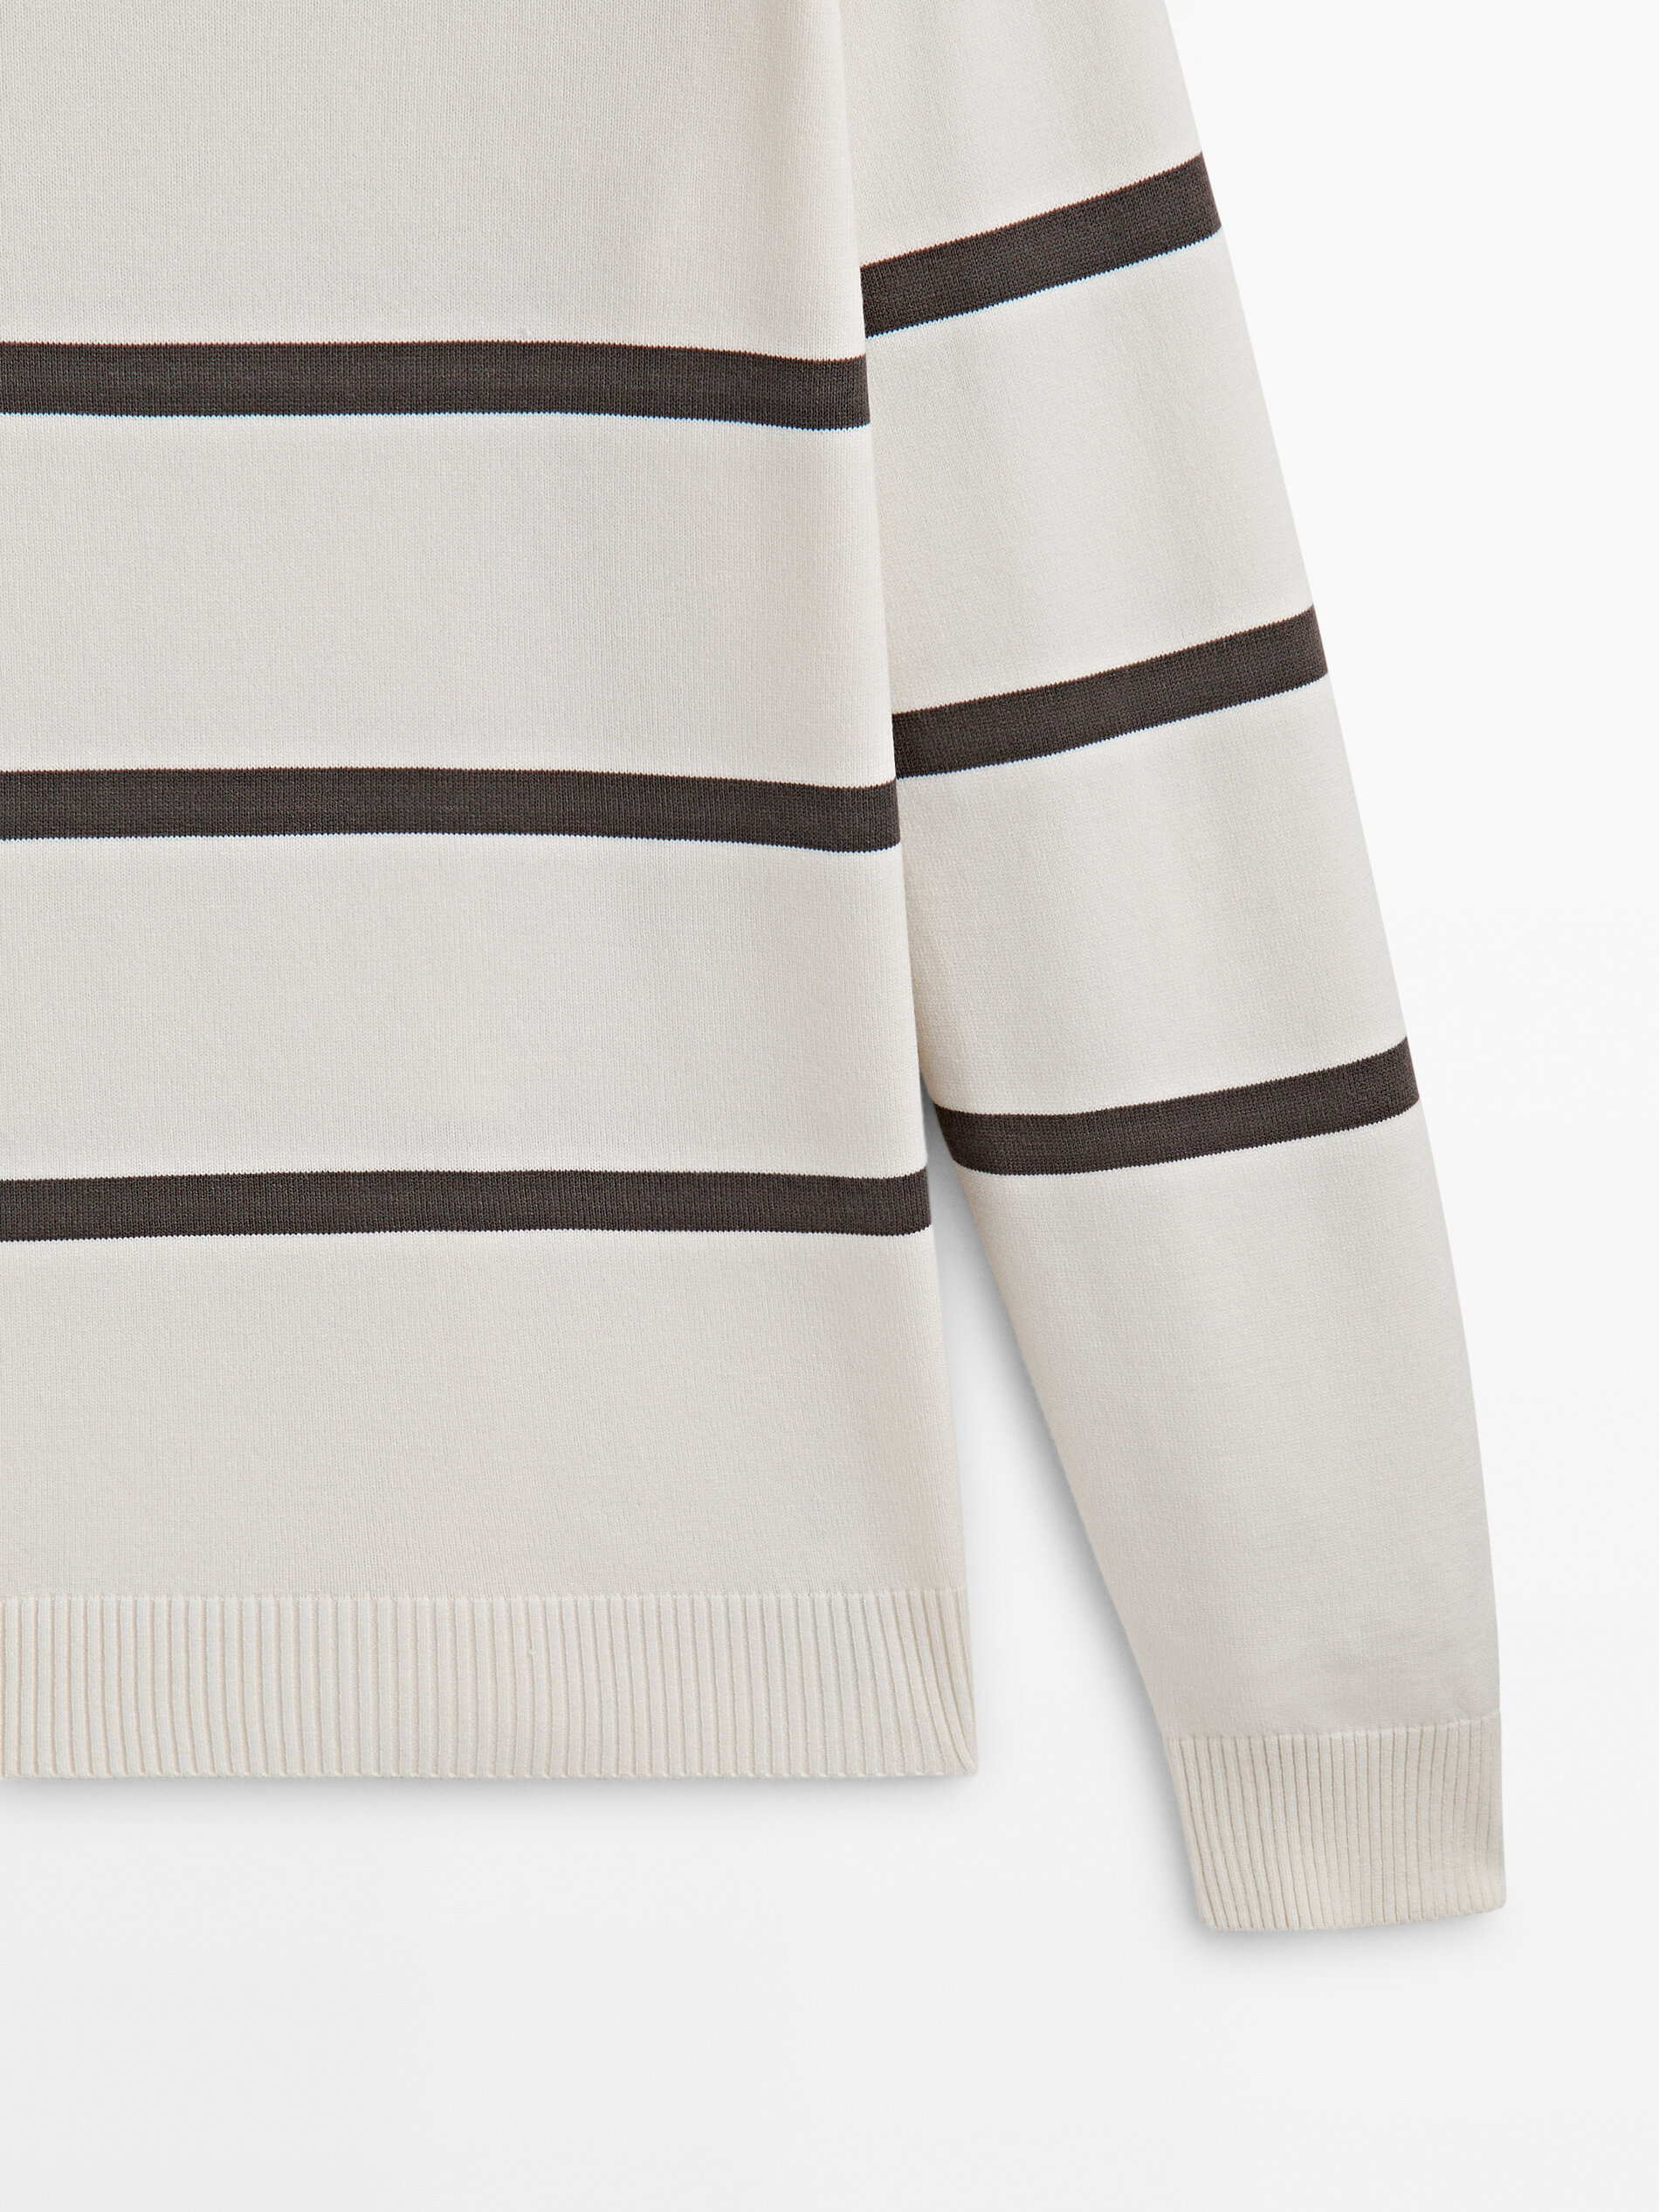 Striped knit comfort sweater with crew neck · Cream, Navy Blue